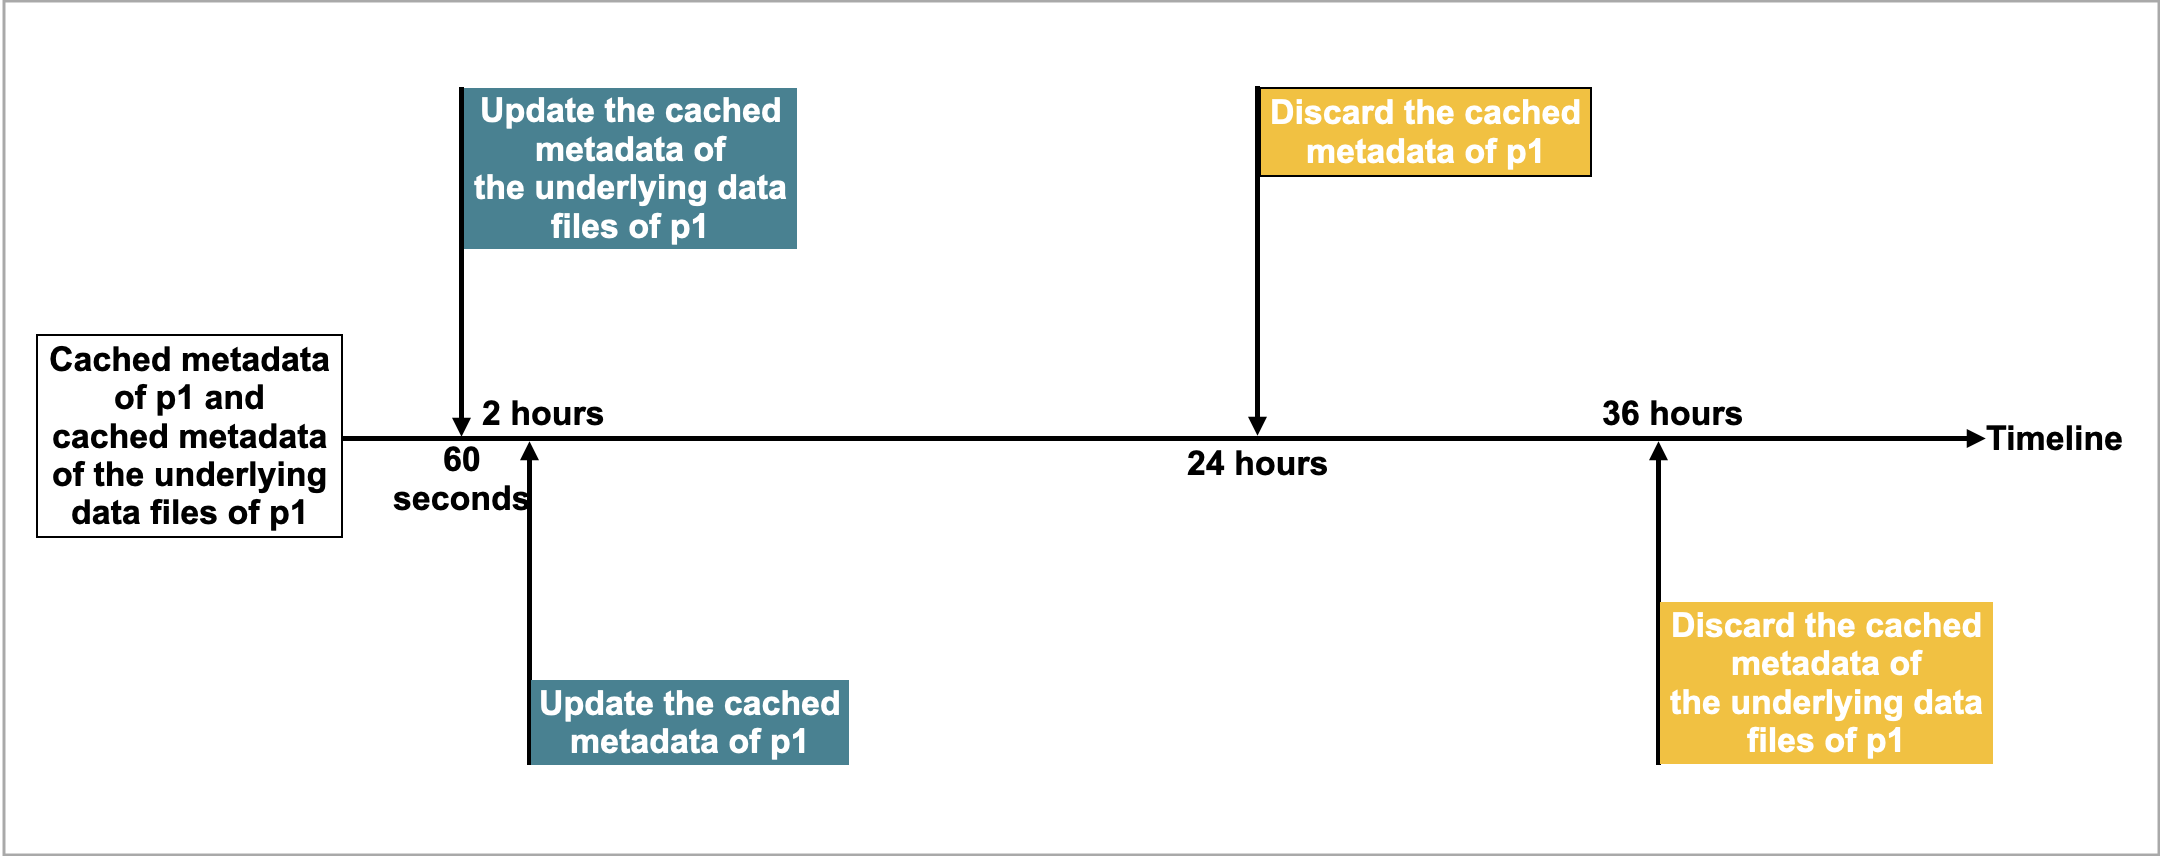 Timeline for updating and discarding cached metadata